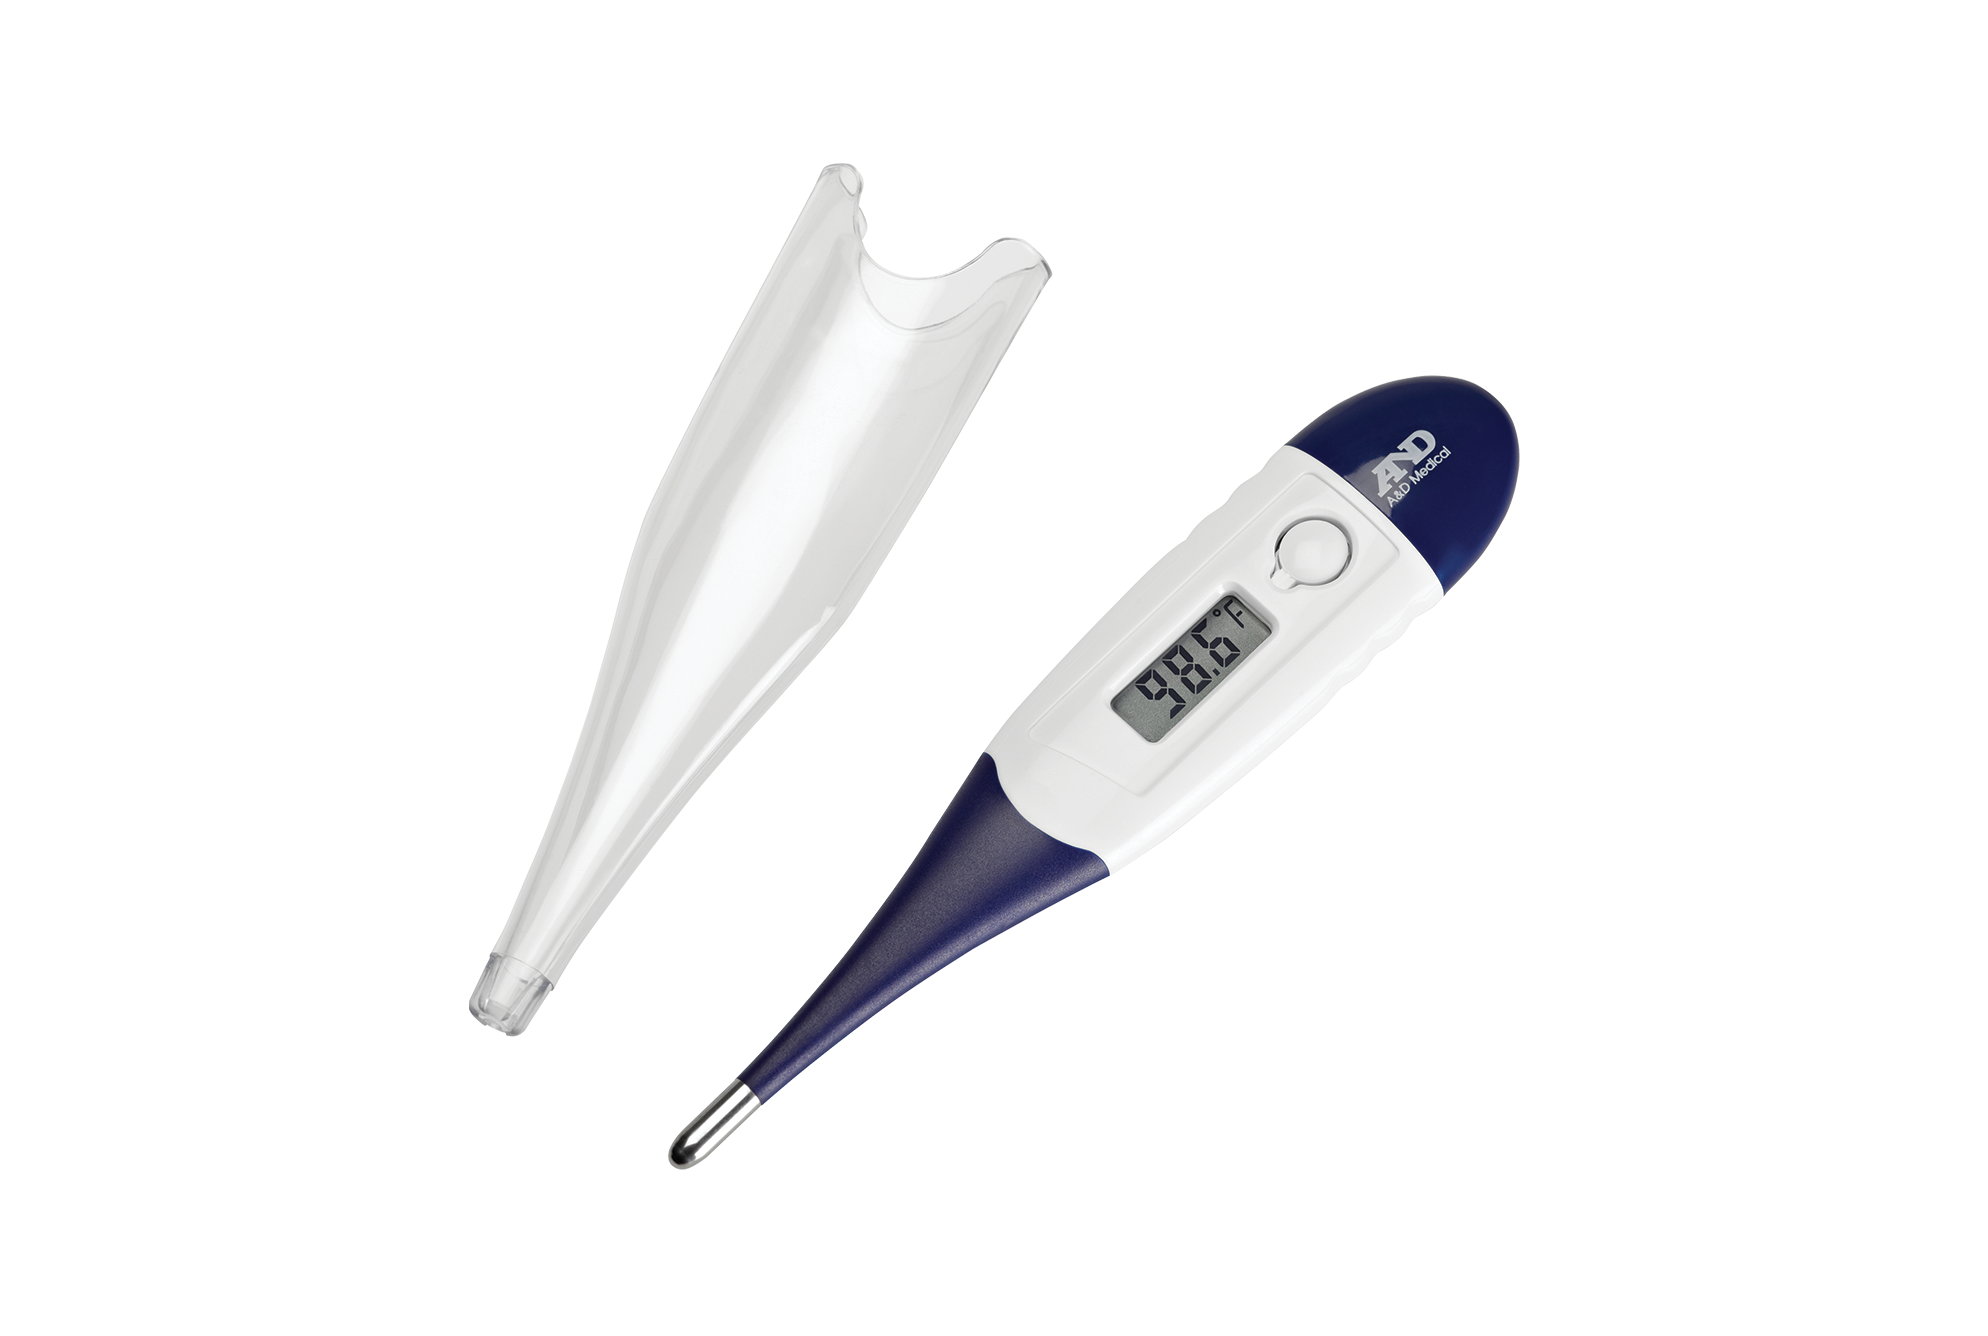 Thermometers - A&D Medical